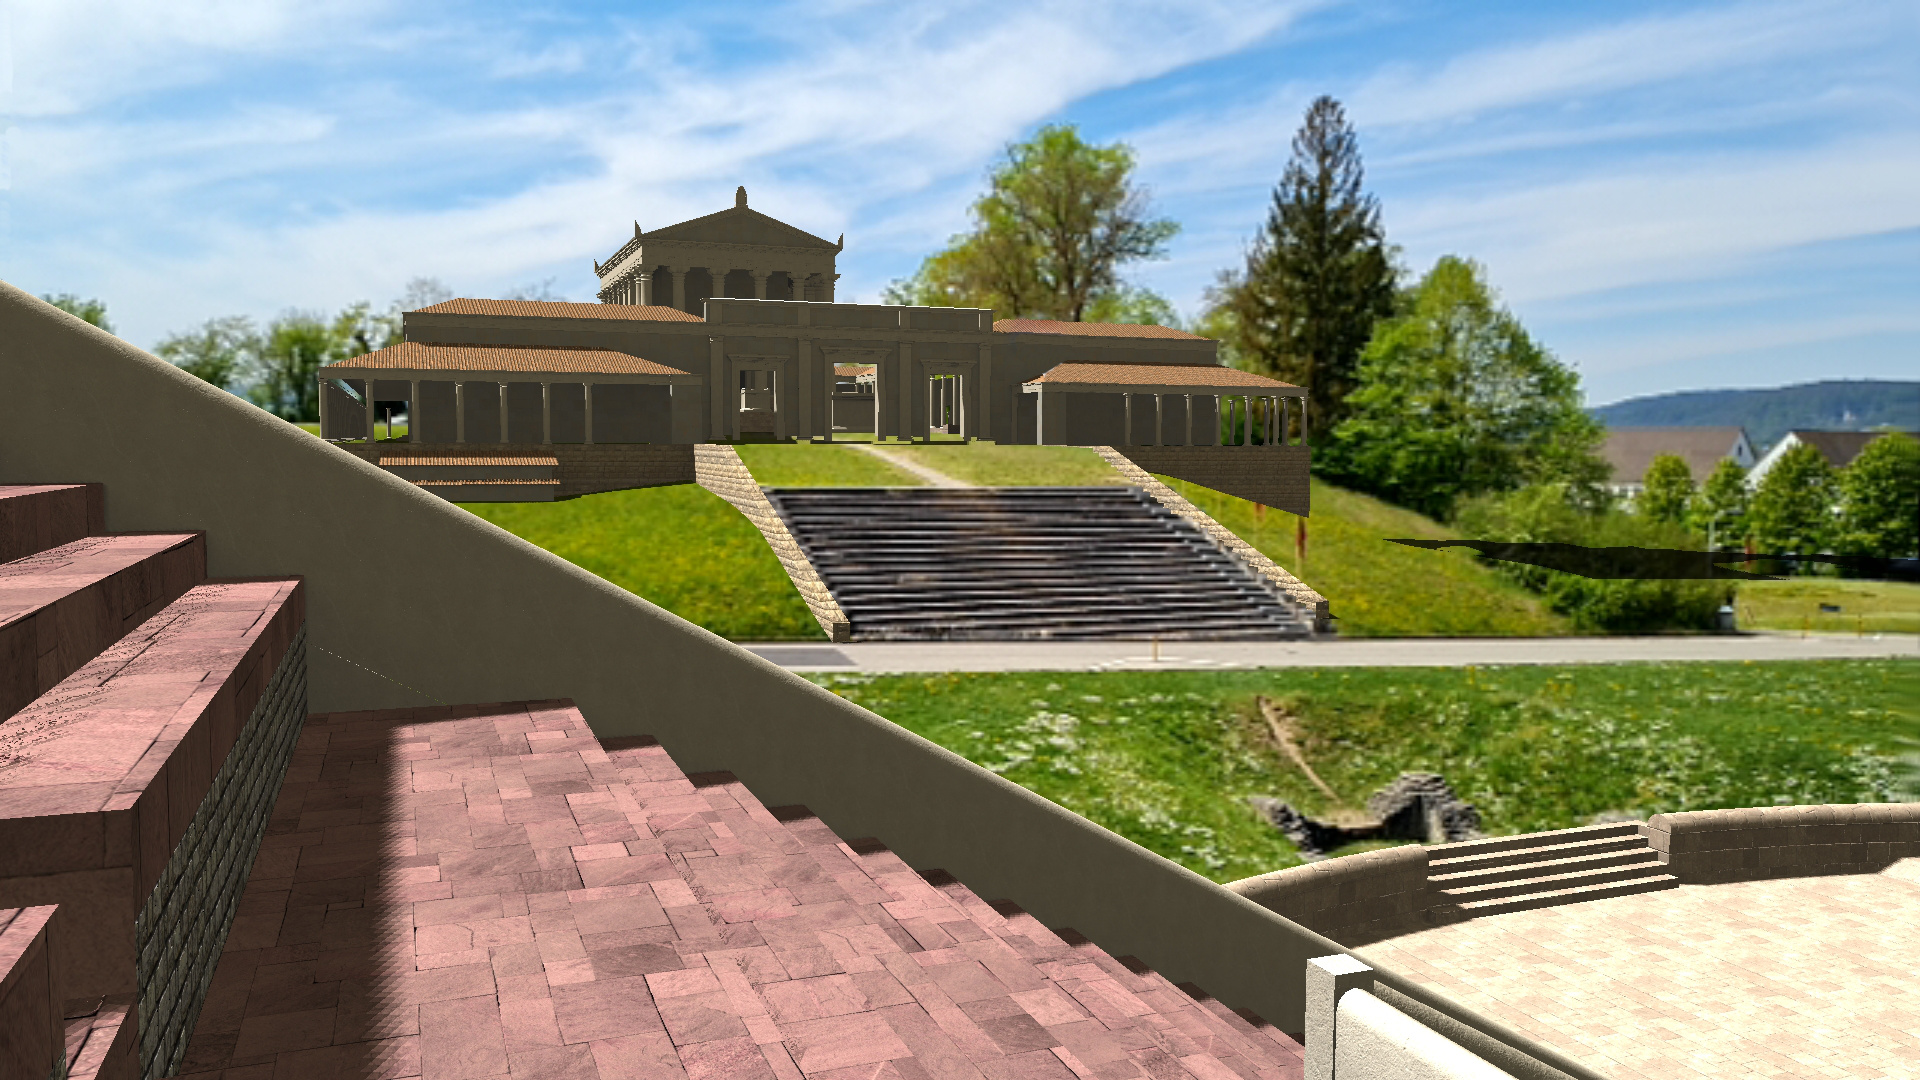 Photo of the Schönbühl hill with a 3D model of the roman temple drawn over it.